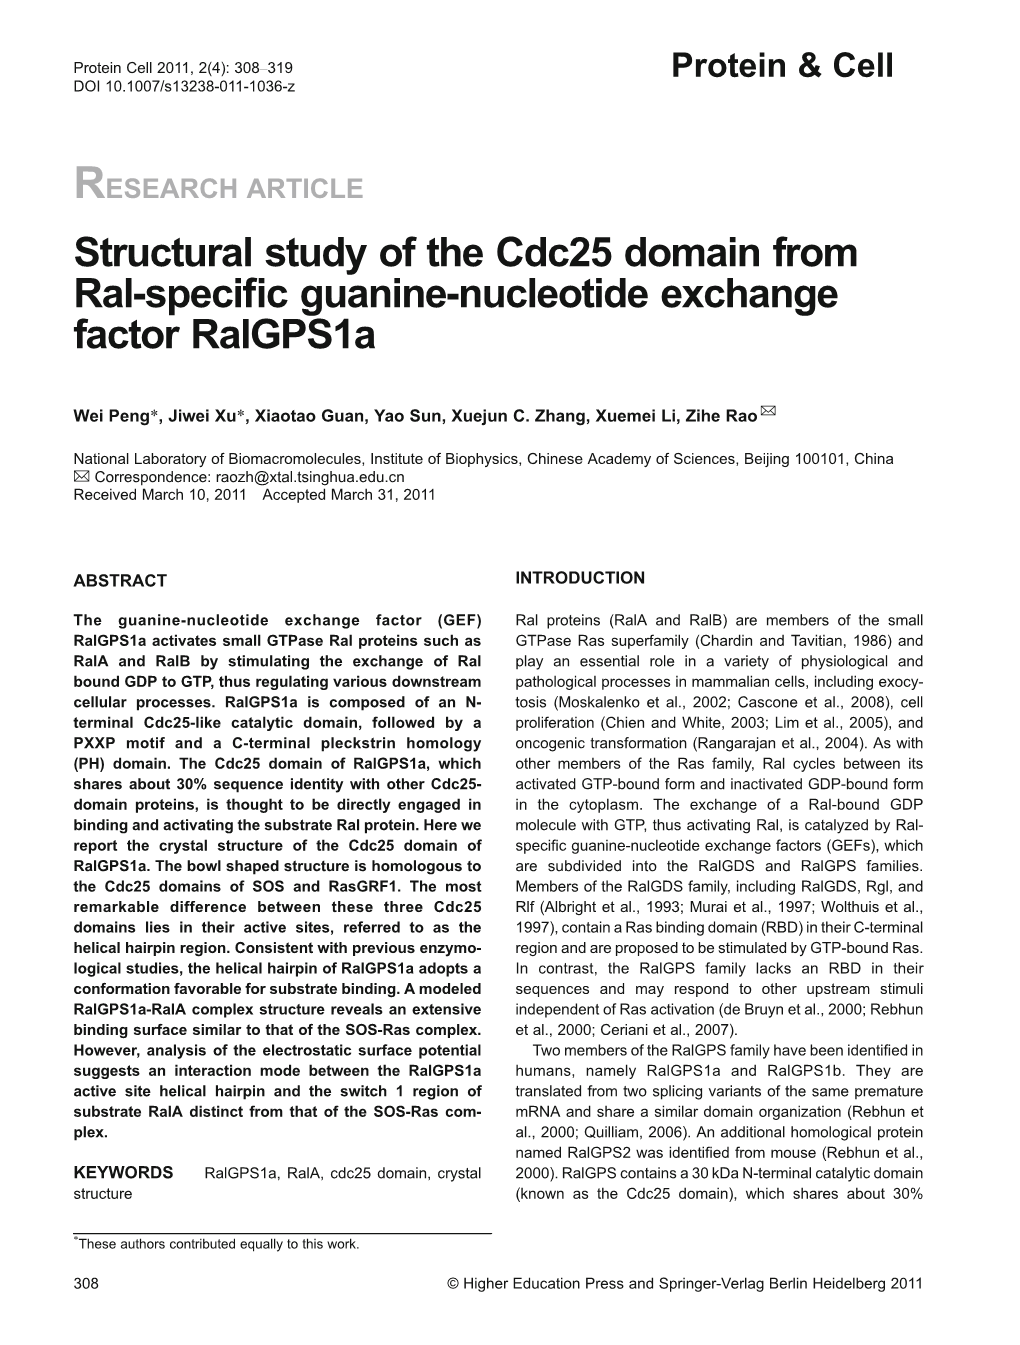 Structural Study of the Cdc25 Domain from Ral-Specific Guanine